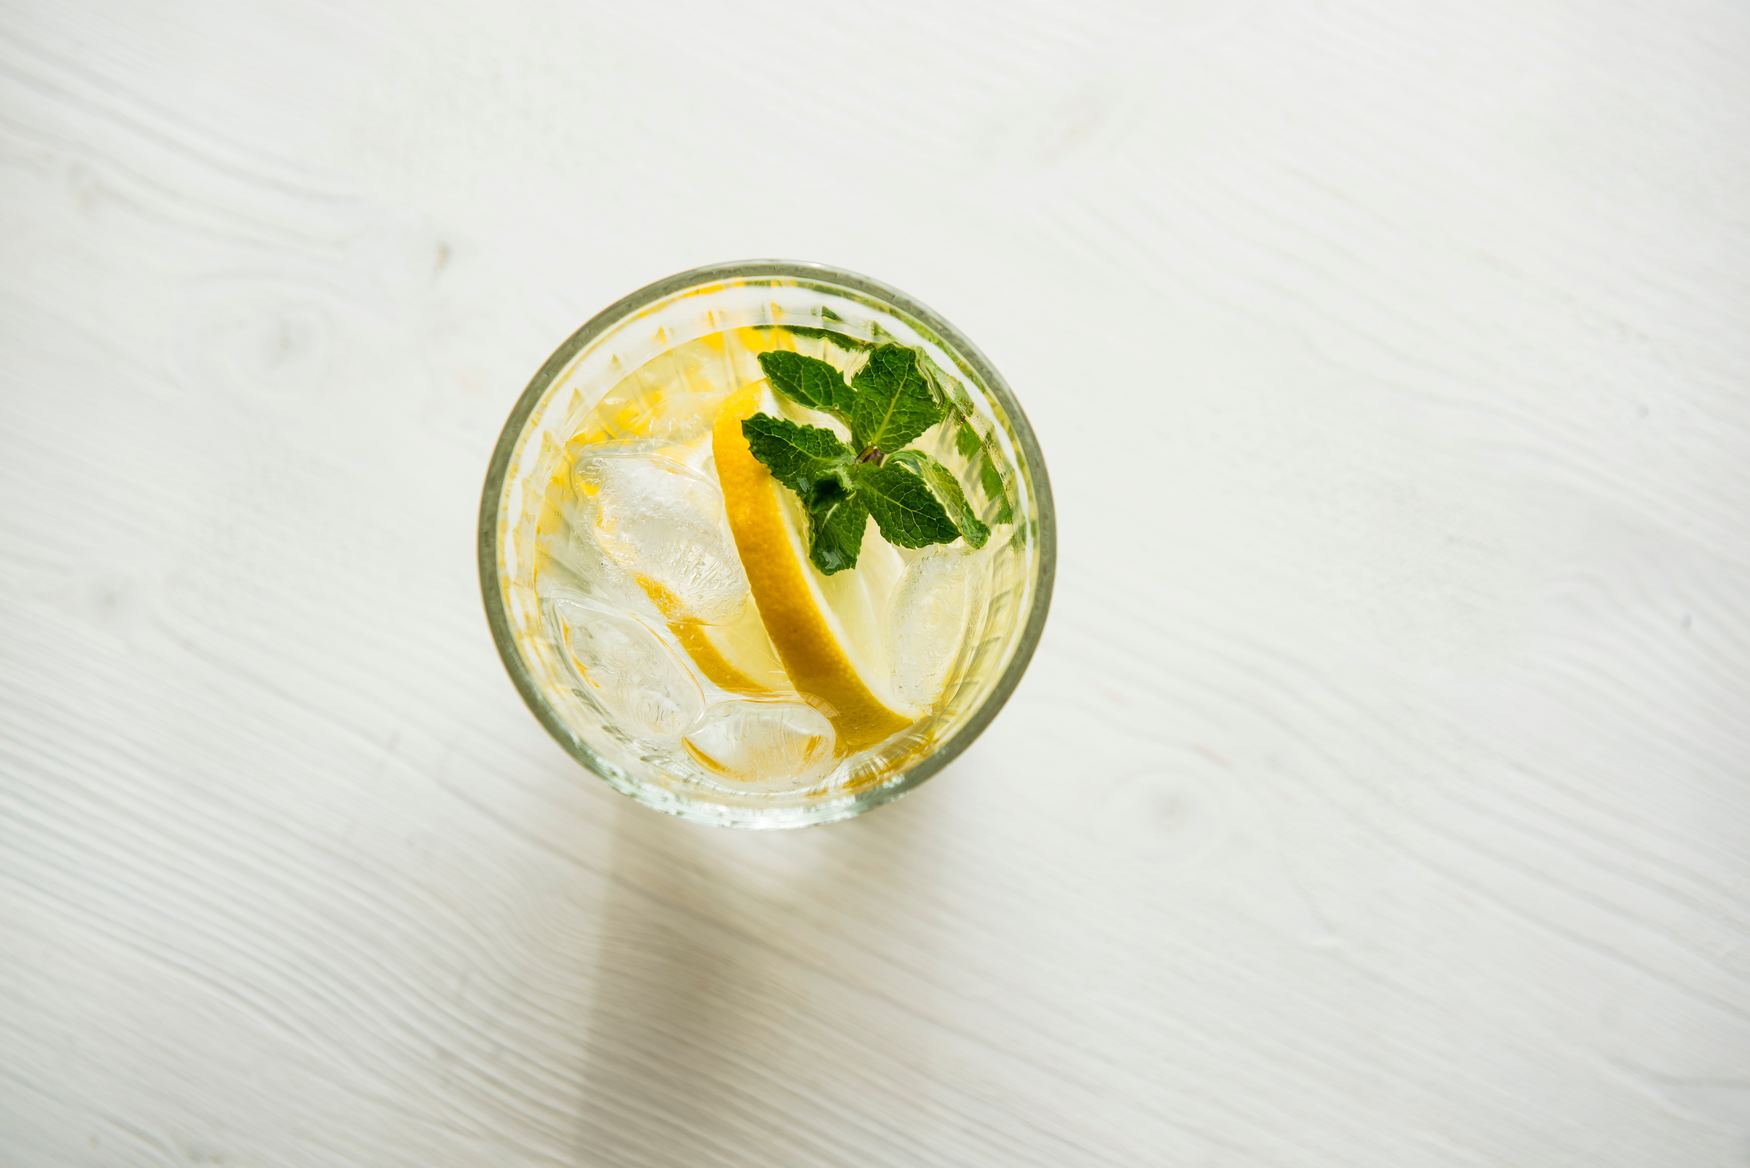 GIN FESTIVAL, WOKING, SURREY, FOOD AND DRINK, GUIDE TO